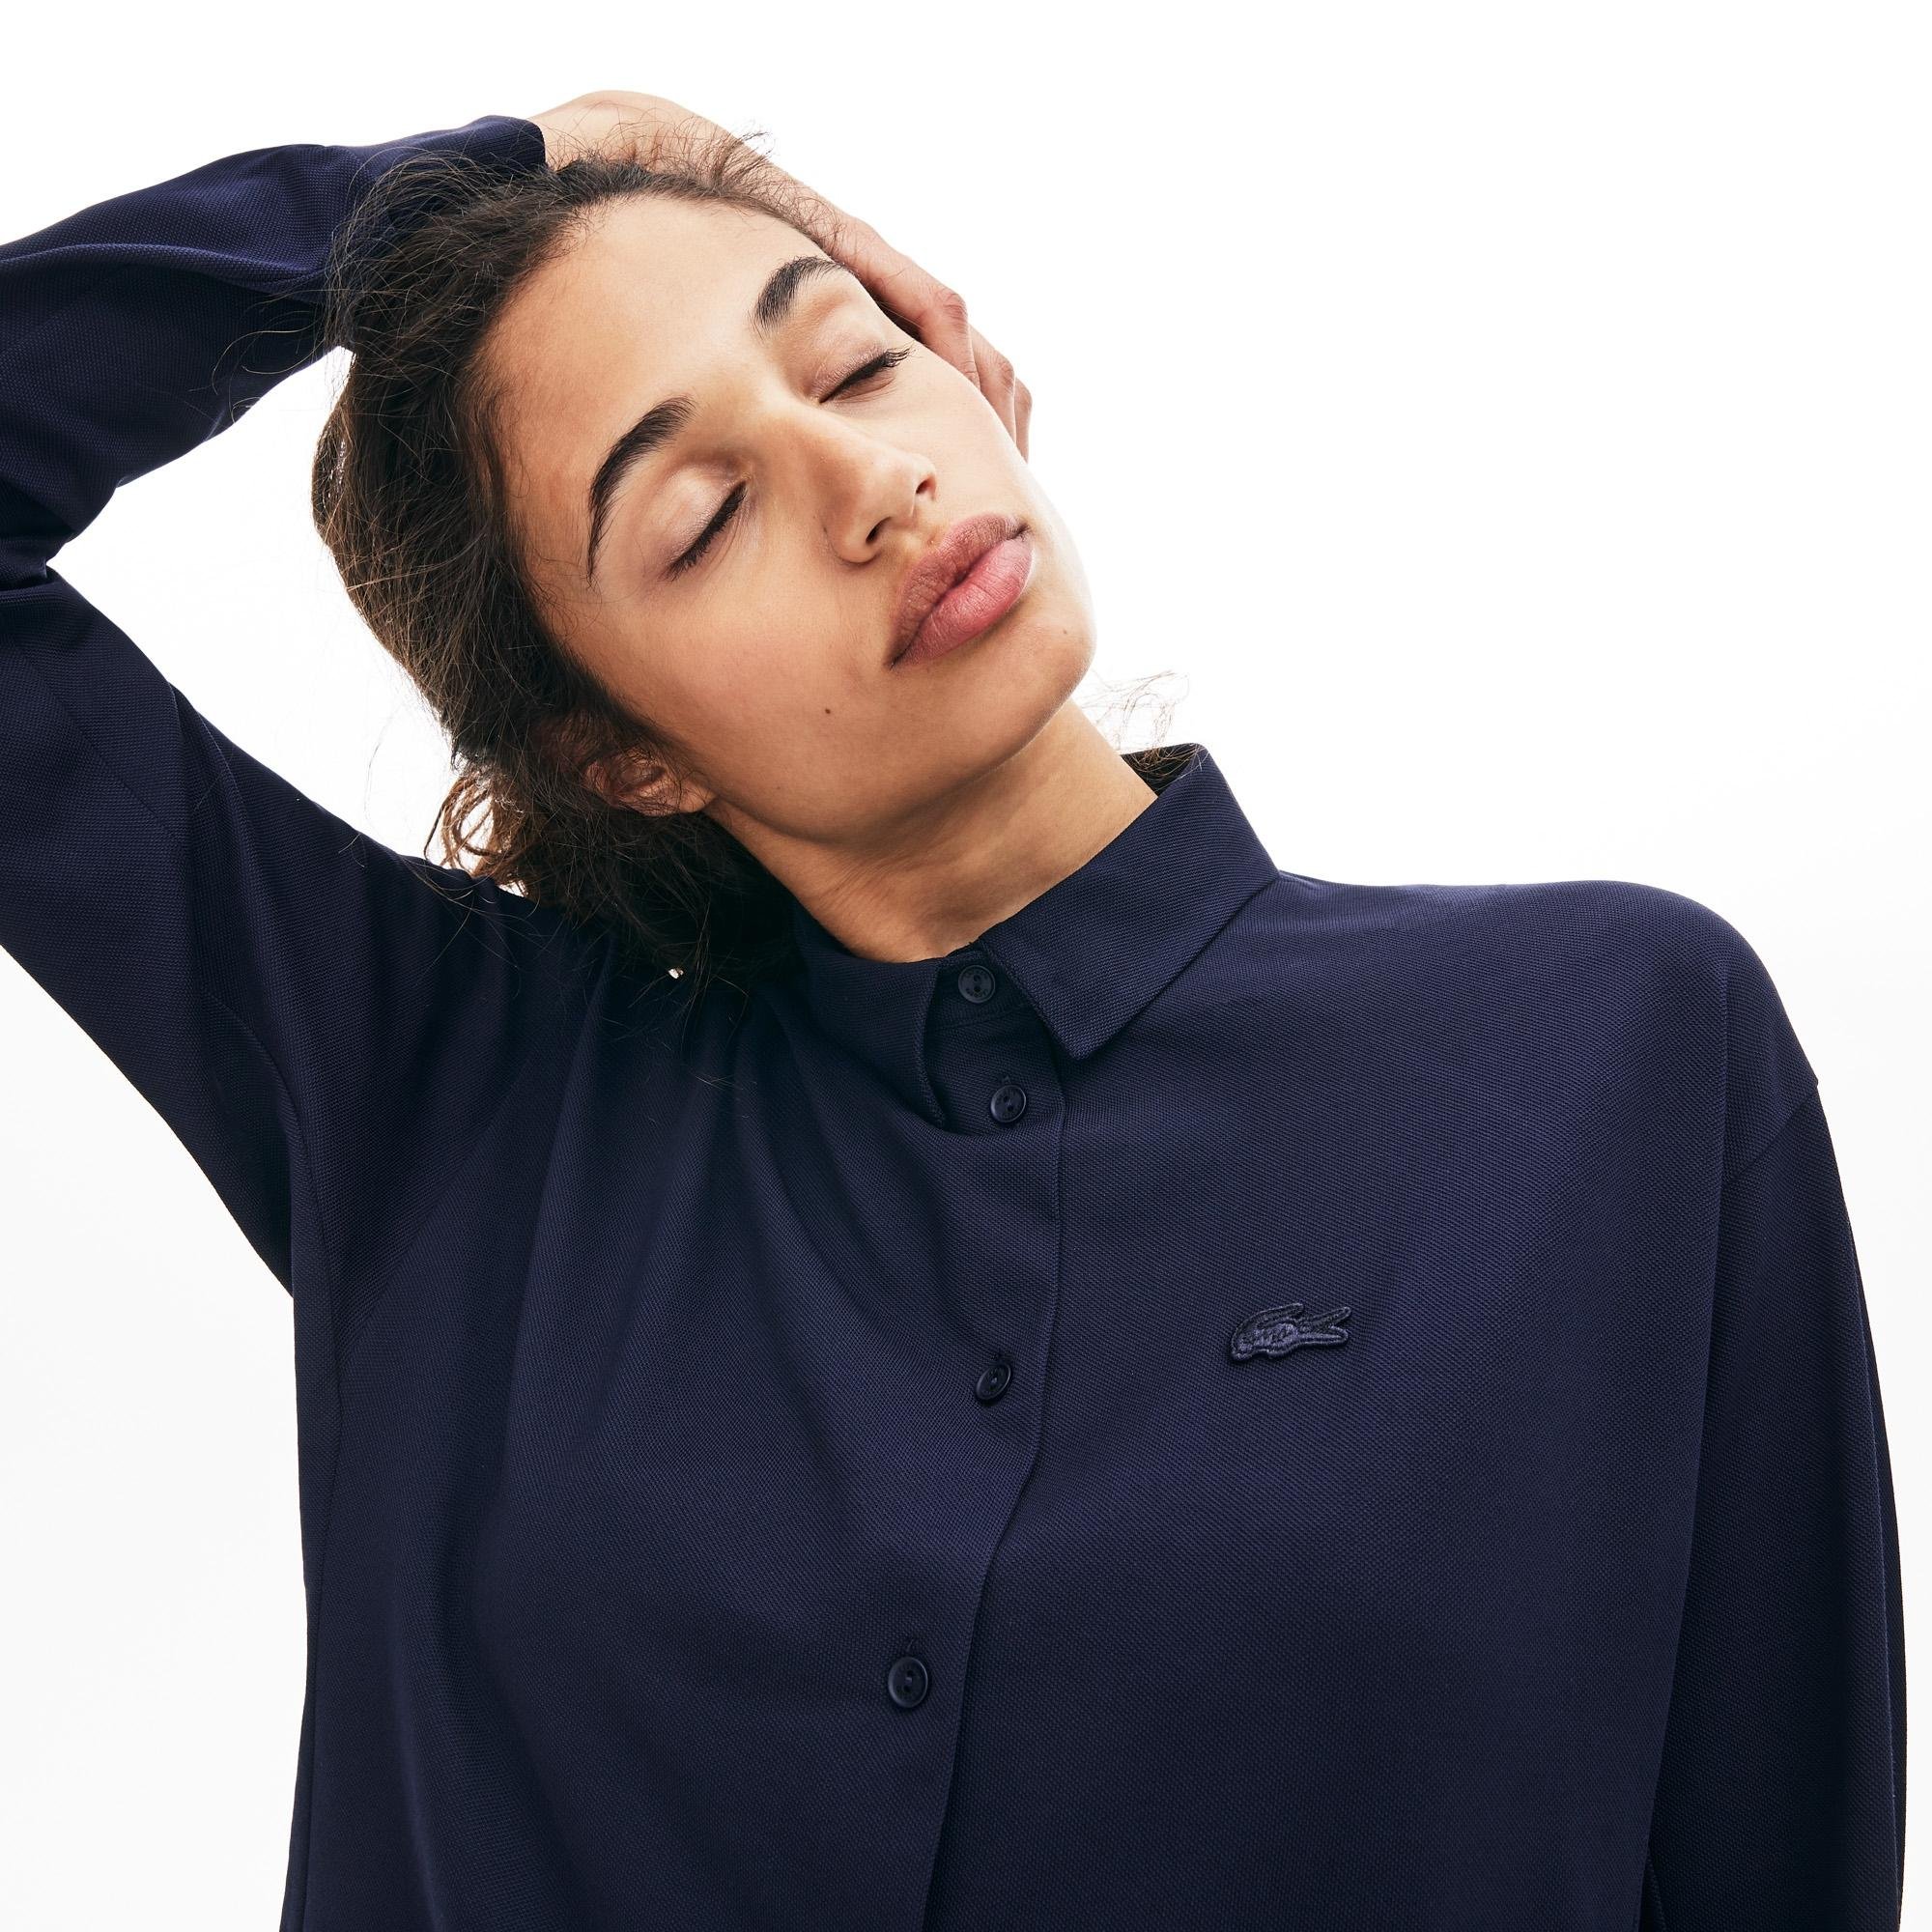 Lacoste Women's Motion Thermoregulating Piqué Polo